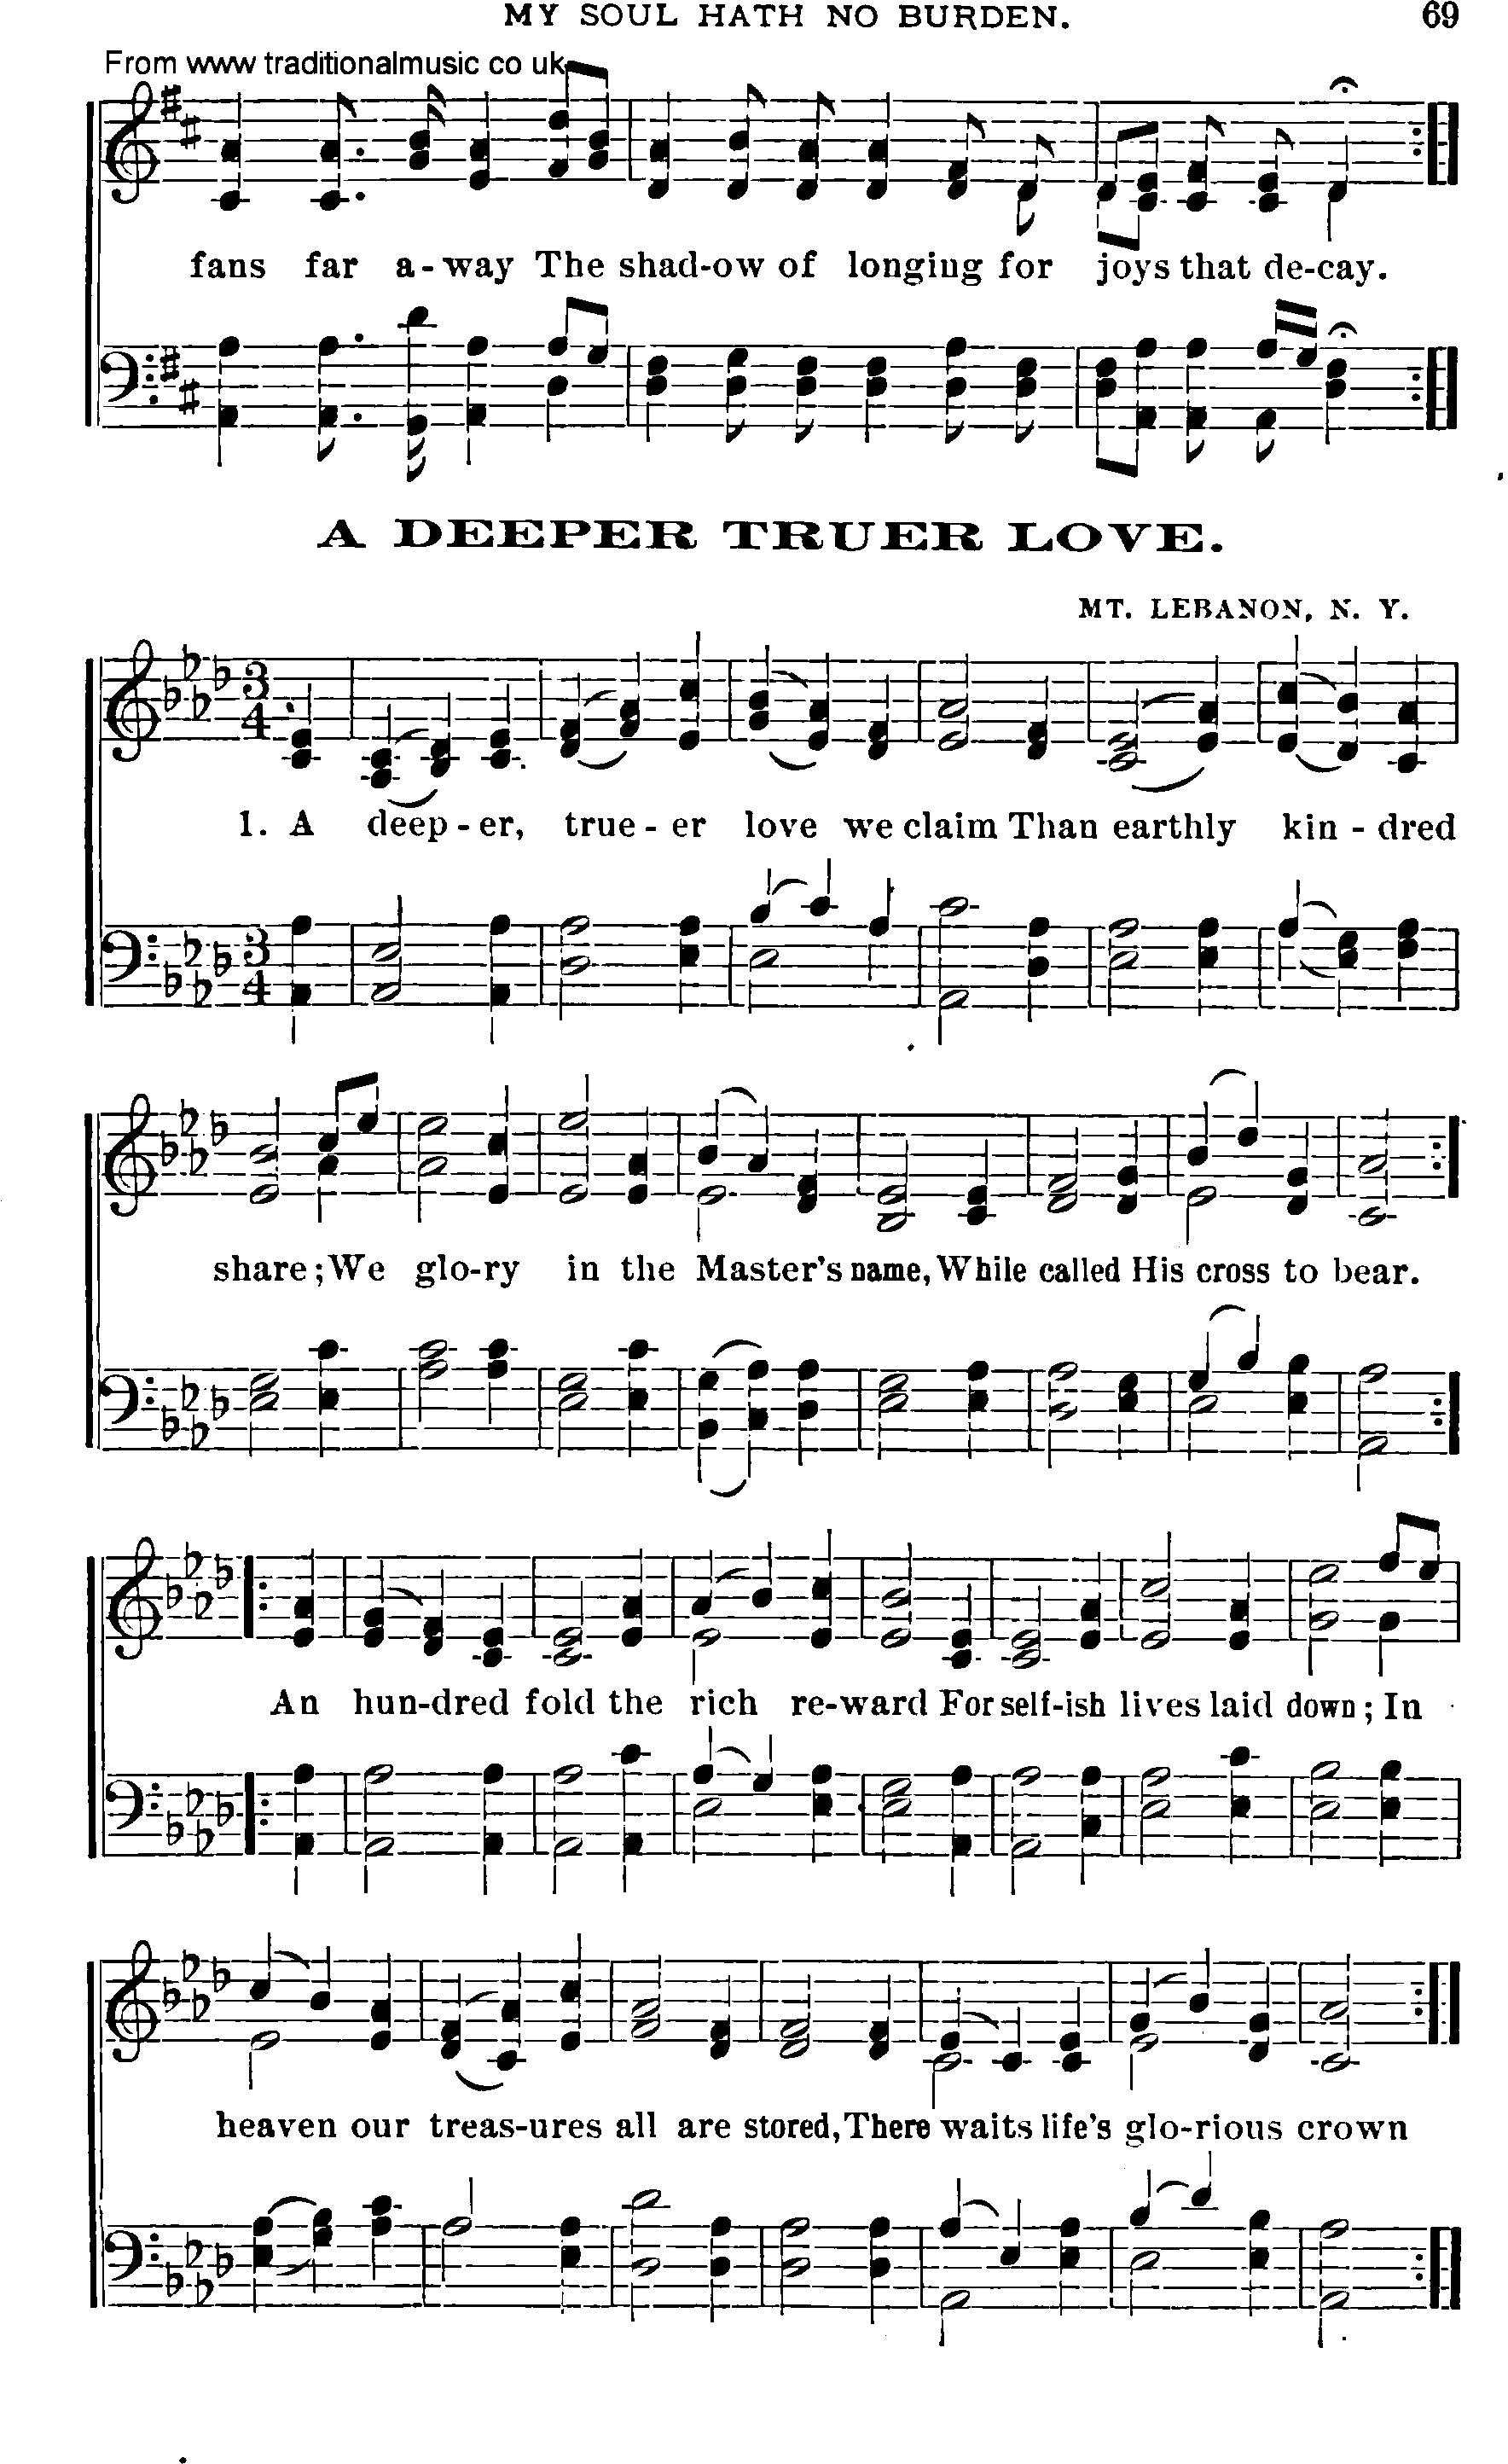 Shaker Music collection, Hymn: a deeper truer love, sheetmusic and PDF